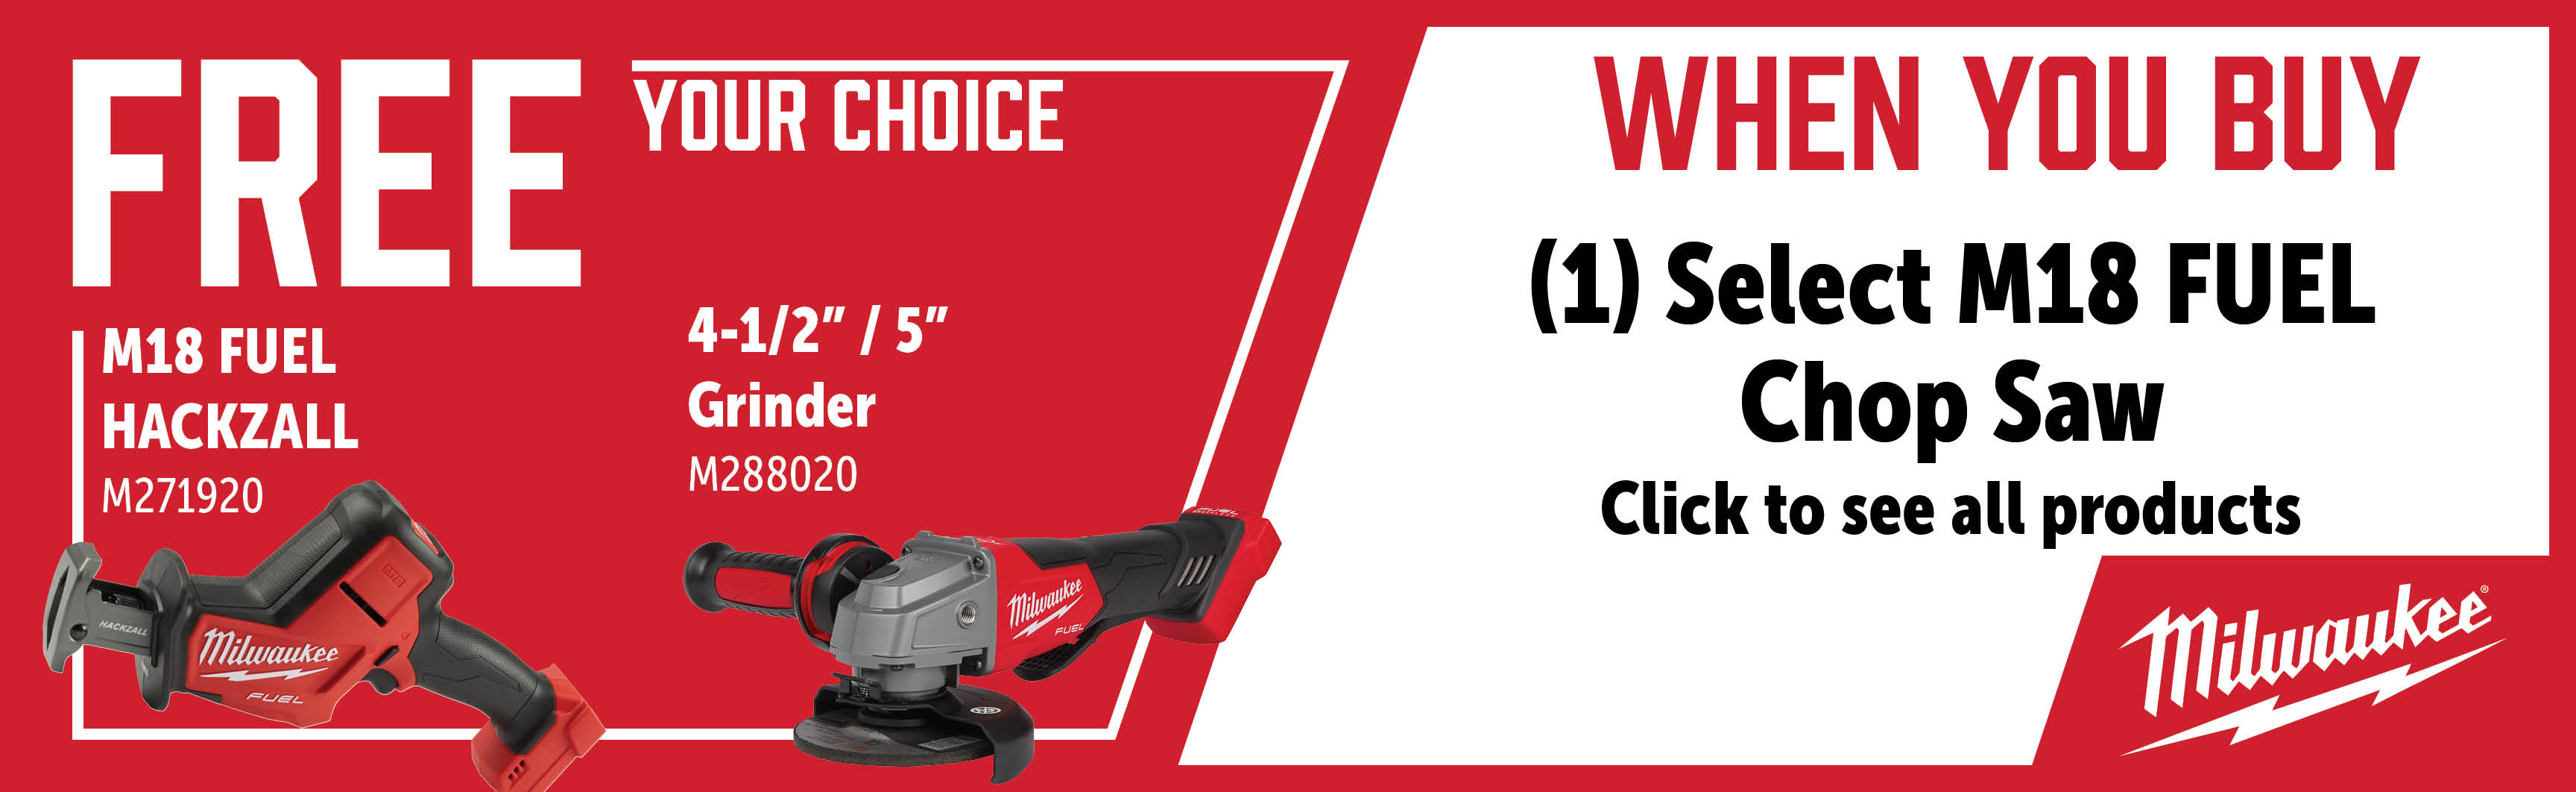 Milwaukee May - July: Buy a M299020 or M299021HD Chop Saw and get a FREE Qualifying Bare Tool